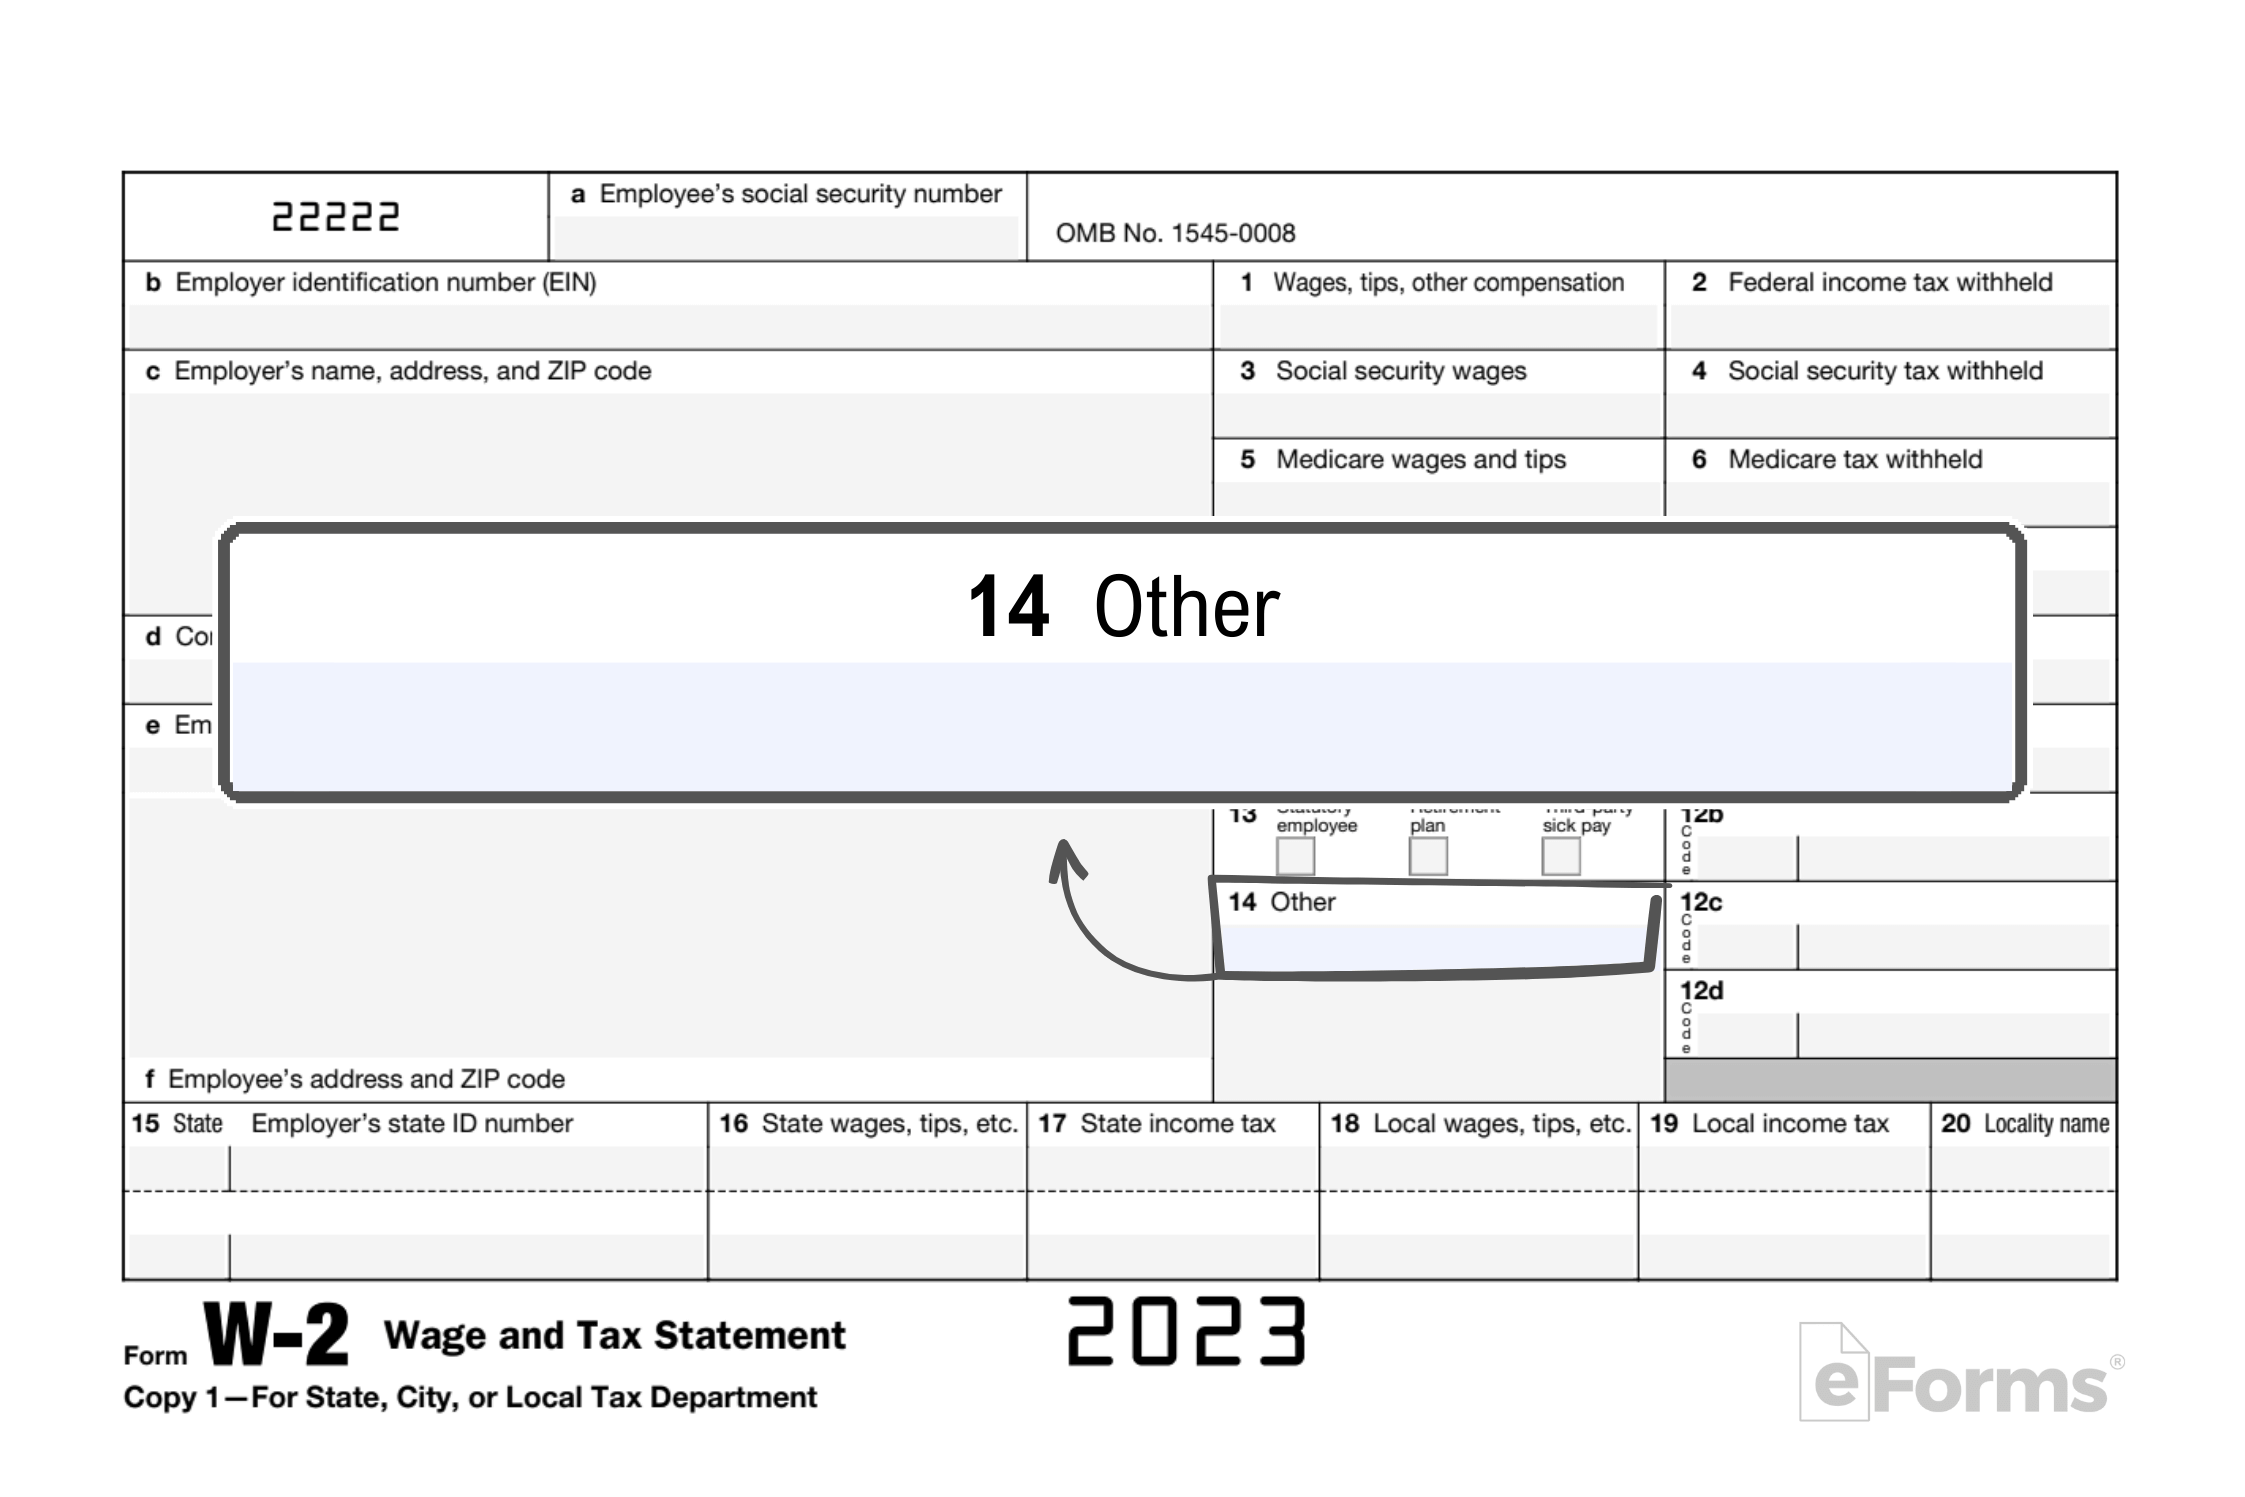 Free Irs Form W-2 | Wage And Tax Statement - Pdf – Eforms pertaining to W2 Form 2023 Printable